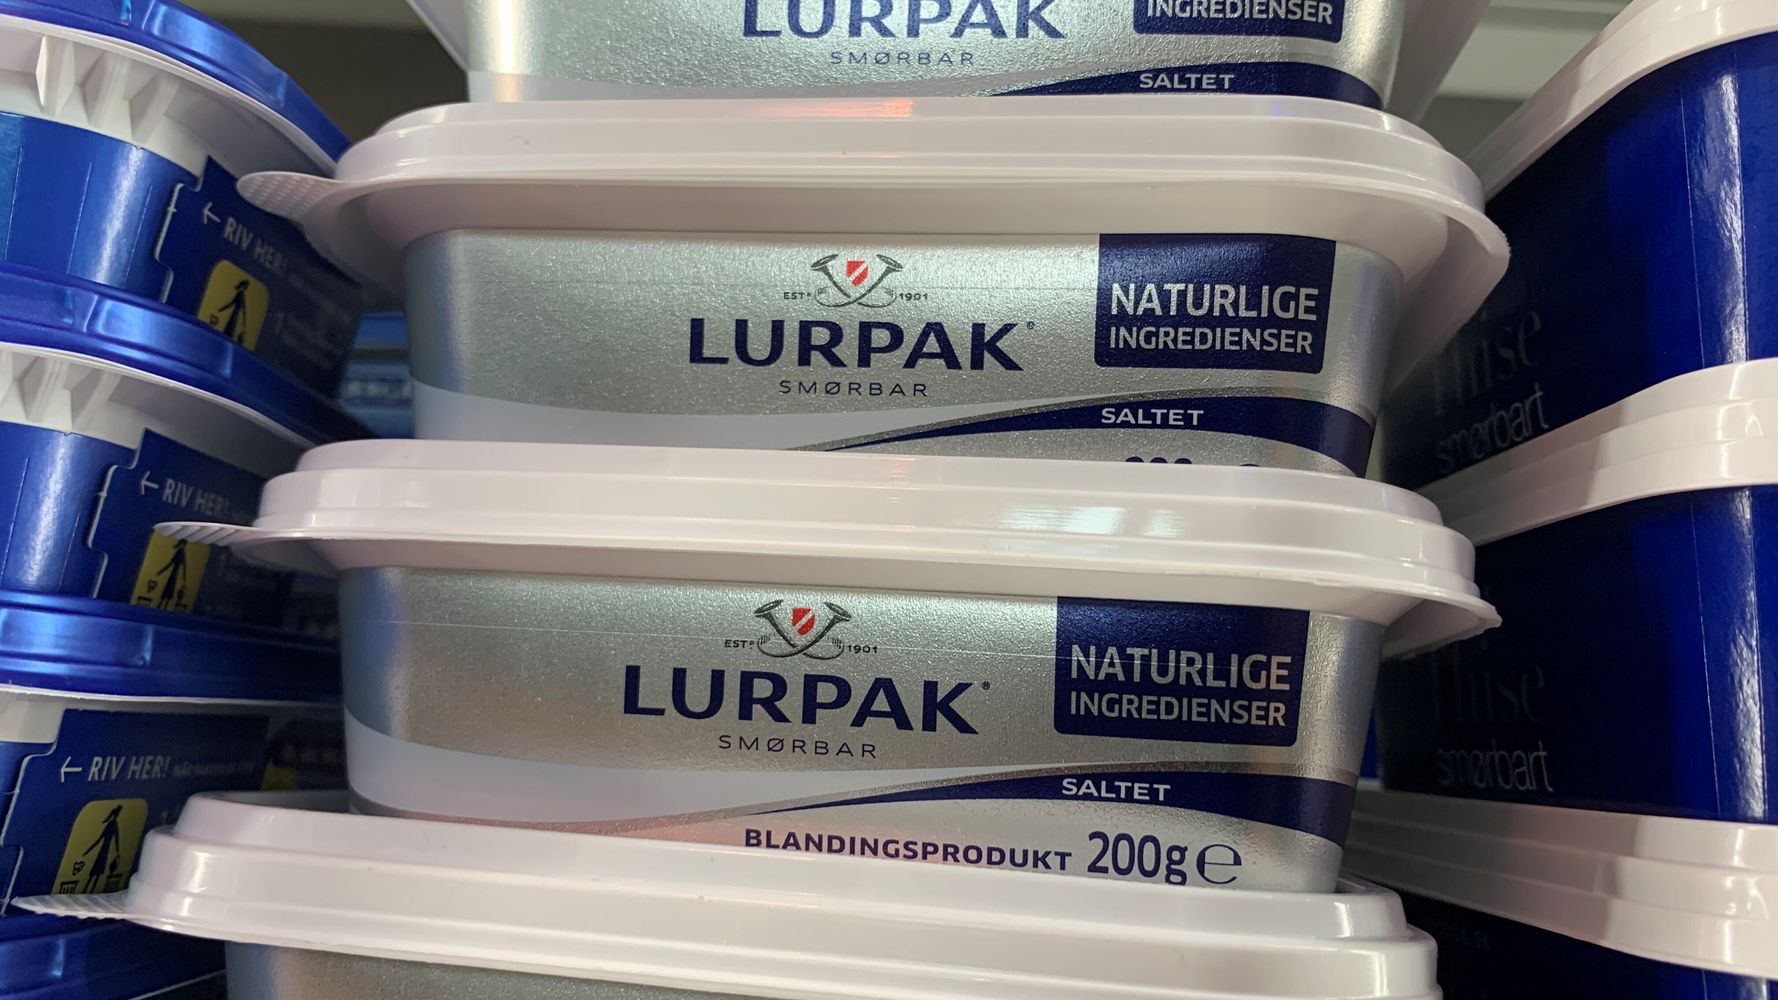 Why Is Lurpak Quickly So Pricey?